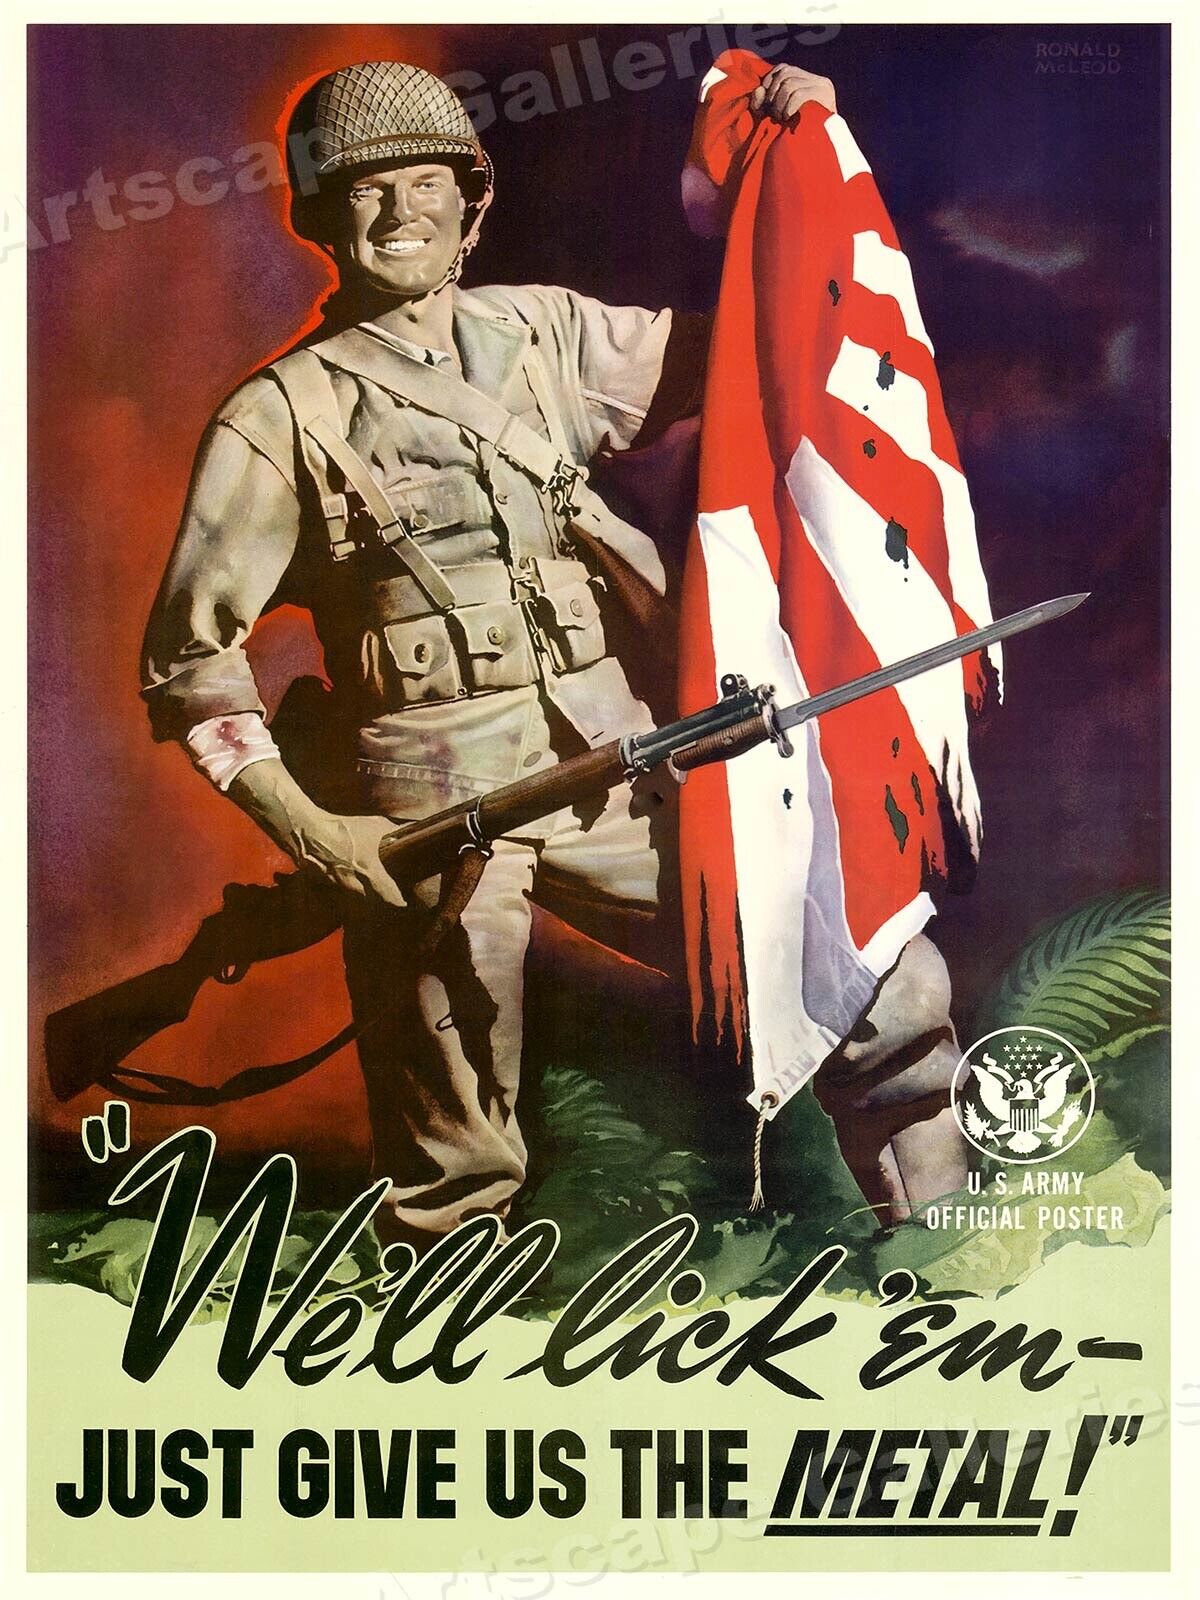 Give Us the Metal Vintage Style 1943 World War 2 Army Poster - 24x32